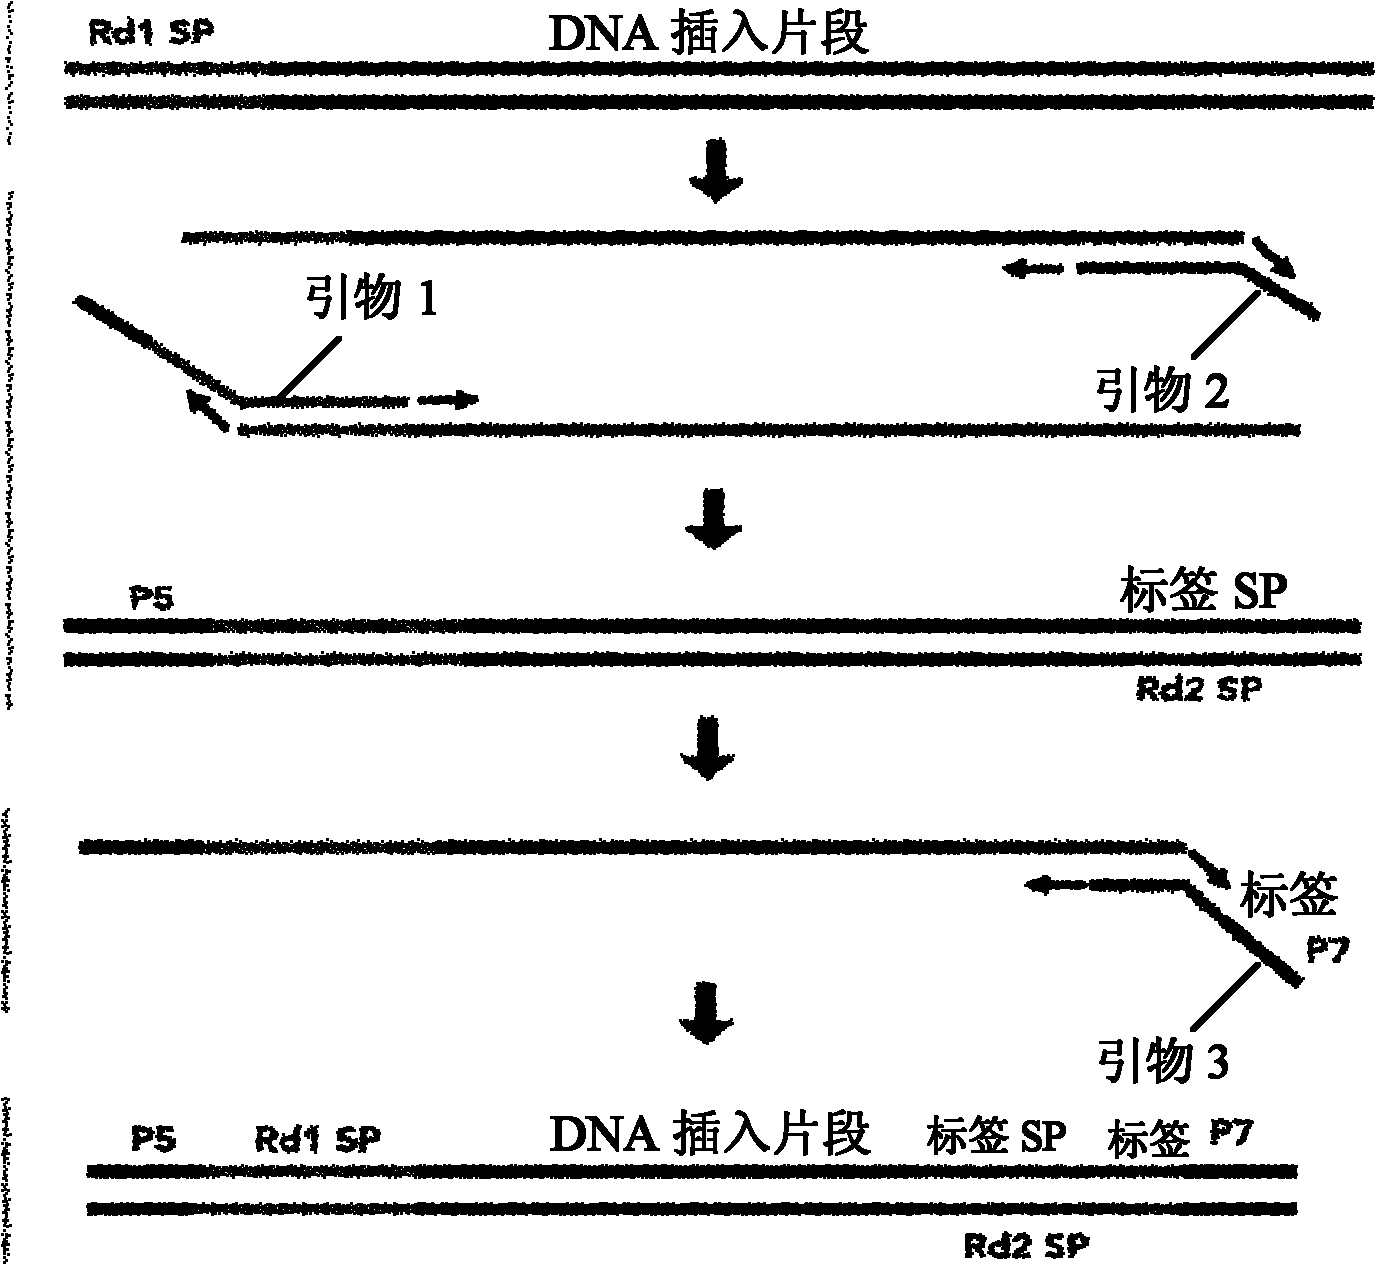 Multi-sample mixed sequencing method and kit